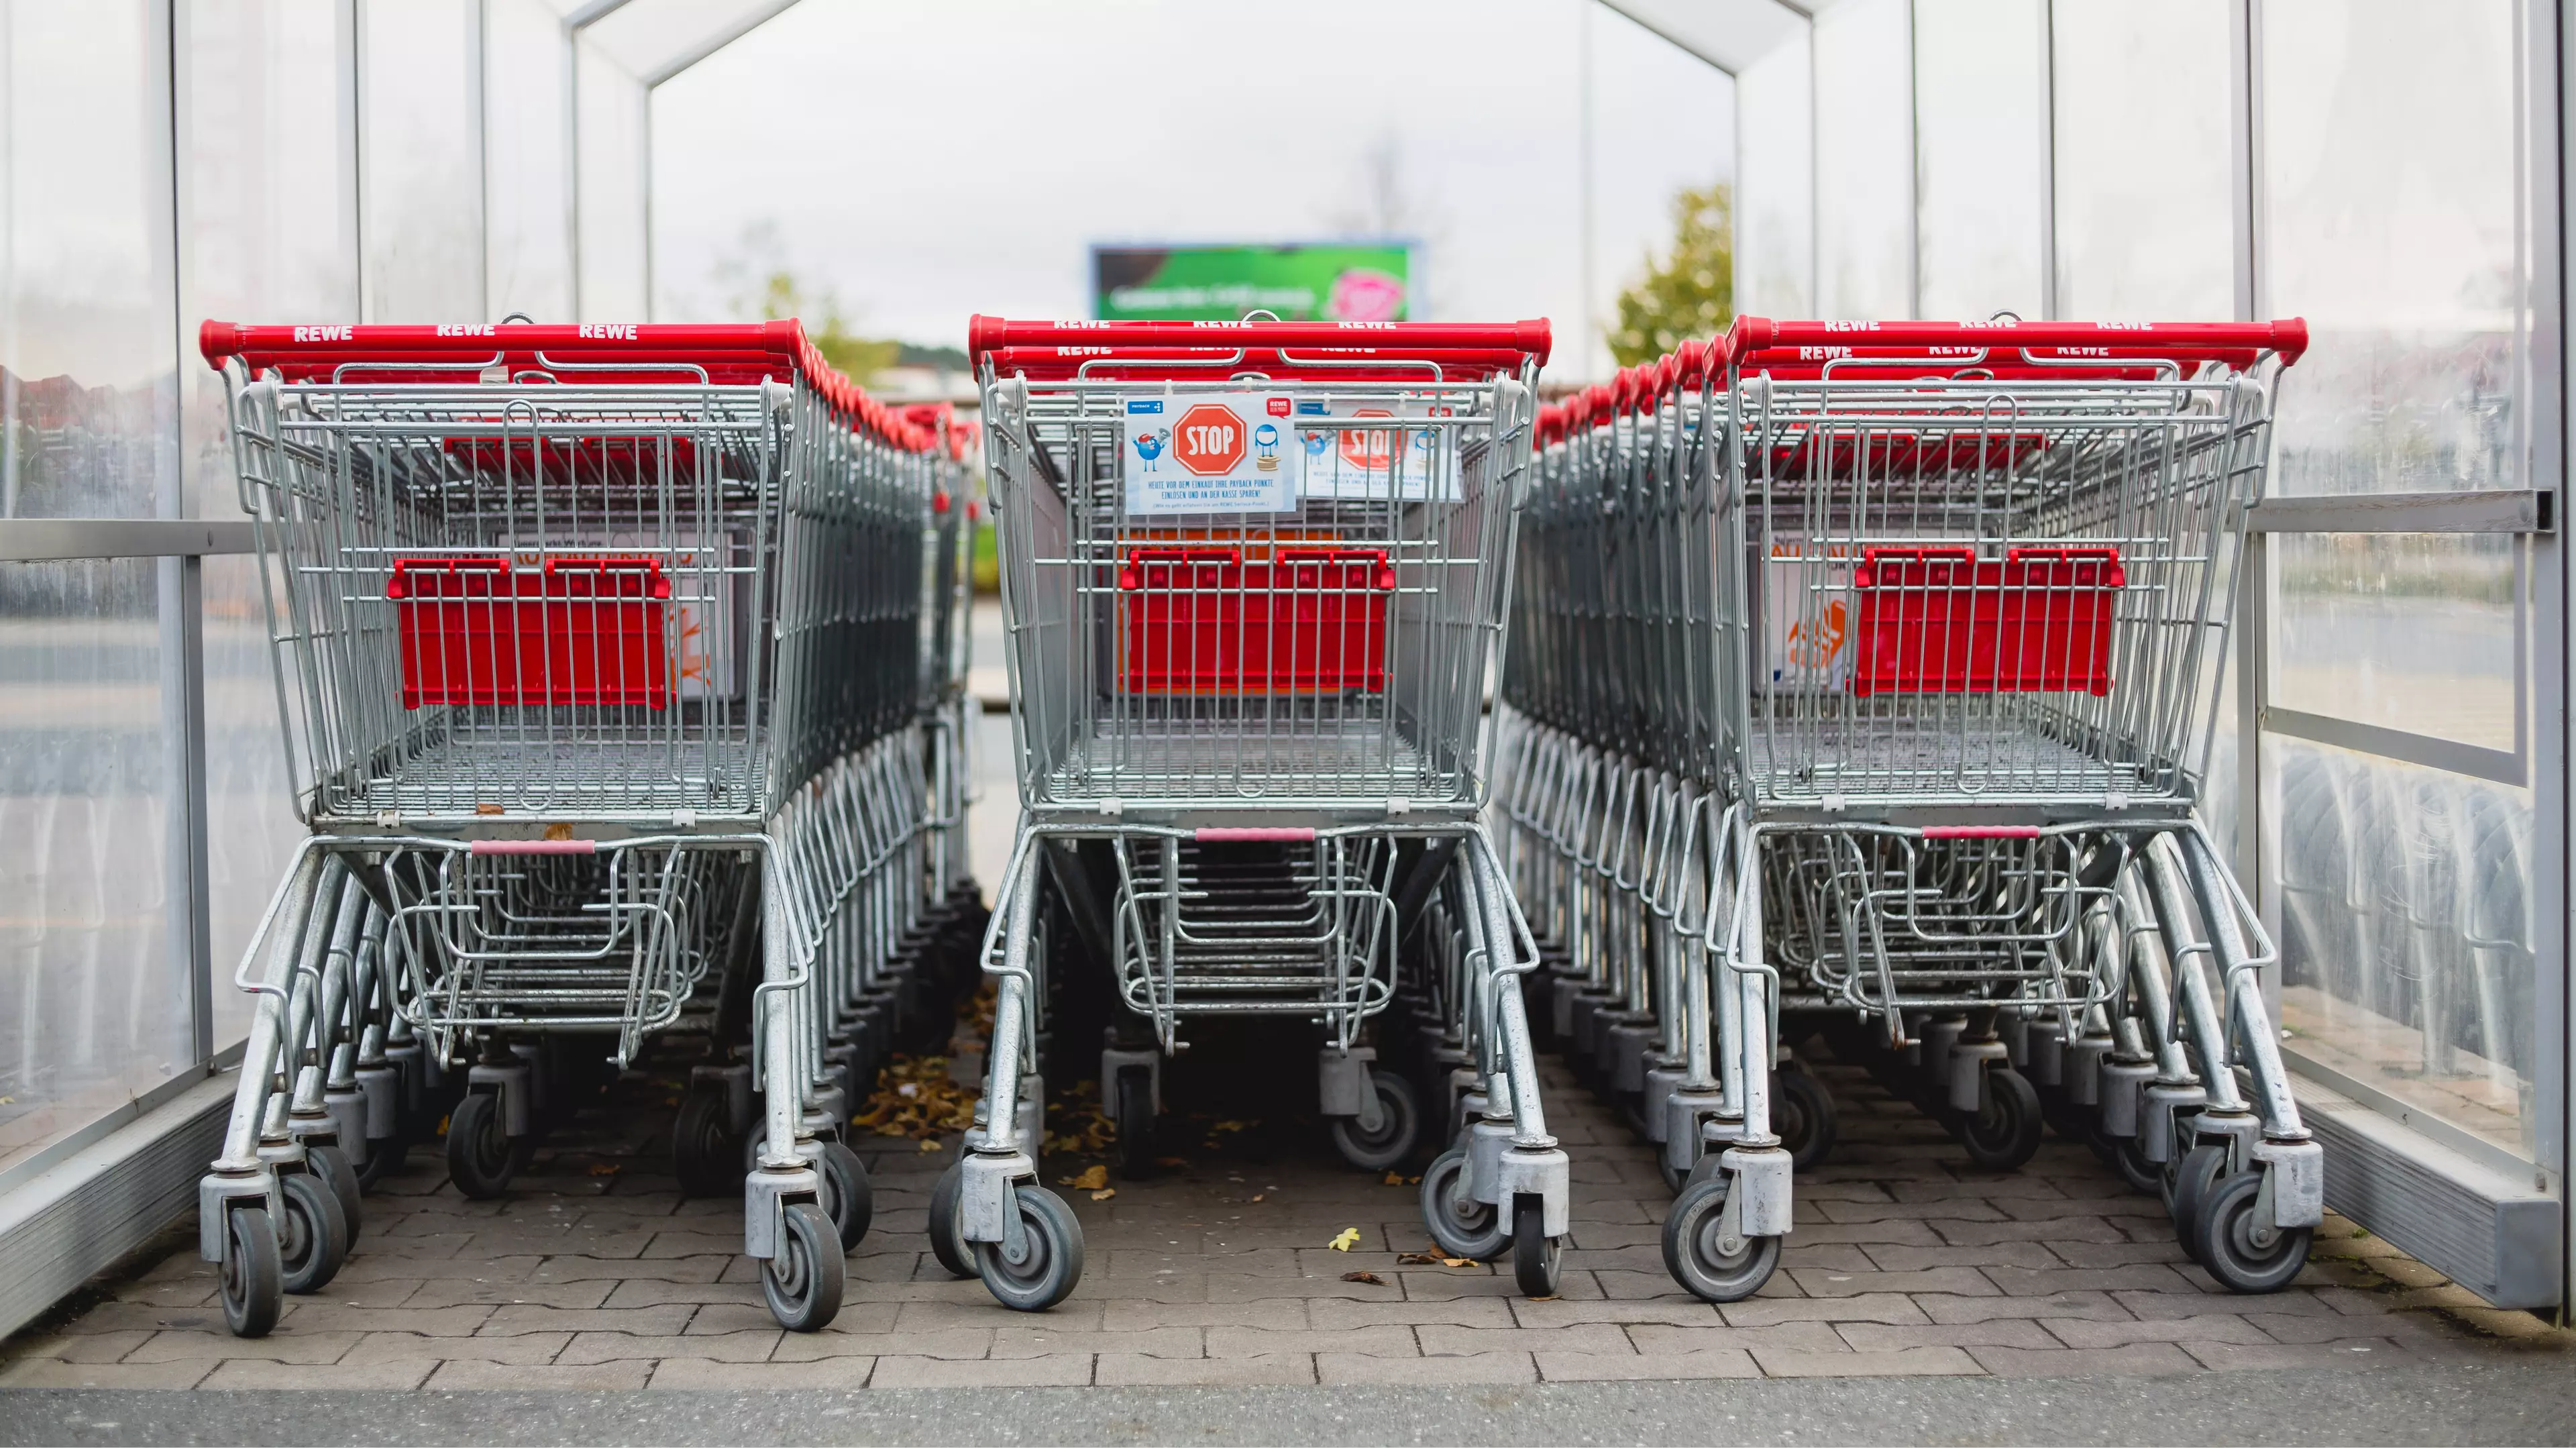 Shopper's Hack For Unlocking Shopping Trolley Without A Pound Coin